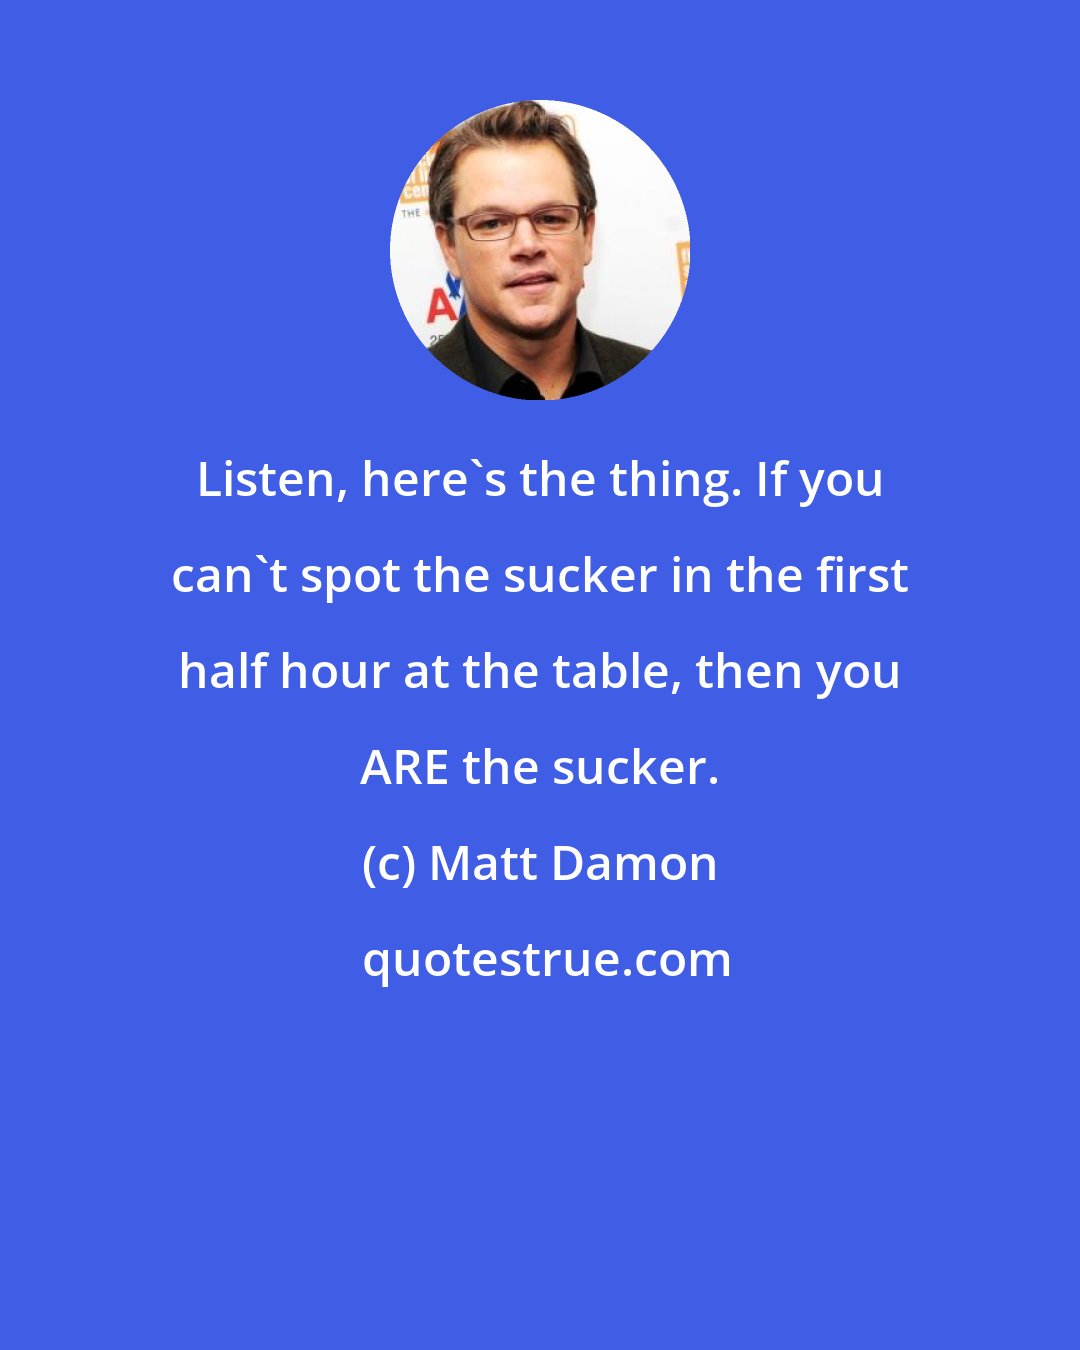 Matt Damon: Listen, here's the thing. If you can't spot the sucker in the first half hour at the table, then you ARE the sucker.